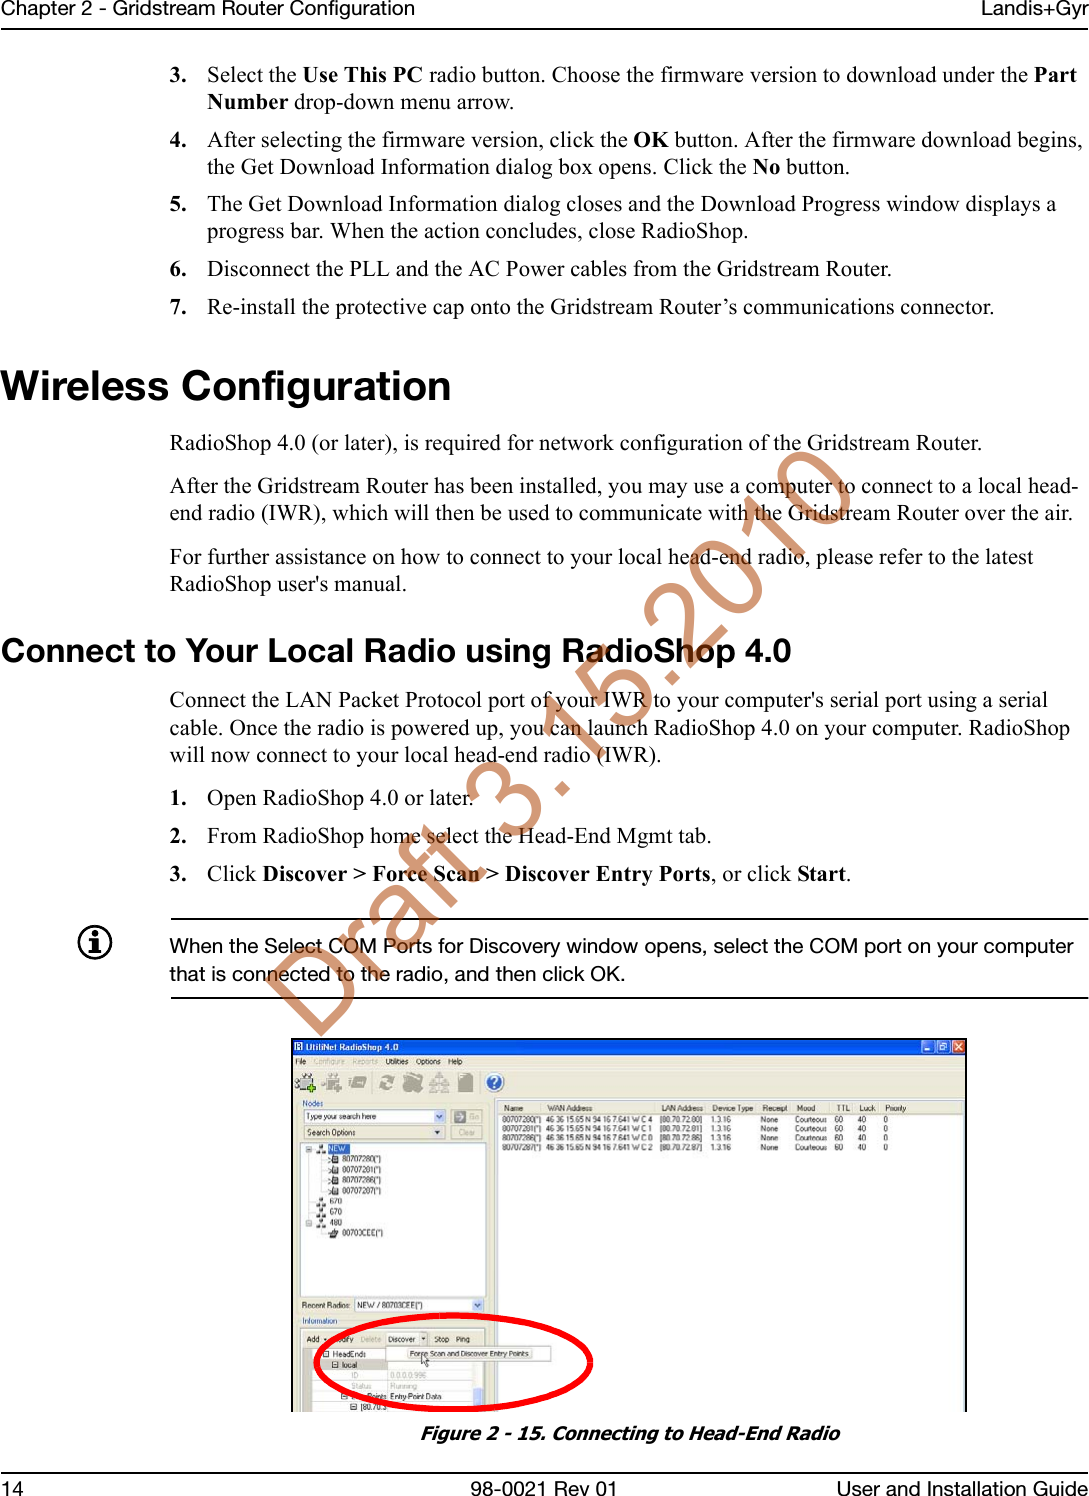 Chapter 2 - Gridstream Router Configuration Landis+Gyr14 98-0021 Rev 01 User and Installation Guide3. Select the Use This PC radio button. Choose the firmware version to download under the Part Number drop-down menu arrow.4. After selecting the firmware version, click the OK button. After the firmware download begins, the Get Download Information dialog box opens. Click the No button.5. The Get Download Information dialog closes and the Download Progress window displays a progress bar. When the action concludes, close RadioShop.6. Disconnect the PLL and the AC Power cables from the Gridstream Router.7. Re-install the protective cap onto the Gridstream Router’s communications connector.Wireless ConfigurationRadioShop 4.0 (or later), is required for network configuration of the Gridstream Router. After the Gridstream Router has been installed, you may use a computer to connect to a local head-end radio (IWR), which will then be used to communicate with the Gridstream Router over the air. For further assistance on how to connect to your local head-end radio, please refer to the latest RadioShop user&apos;s manual.Connect to Your Local Radio using RadioShop 4.0Connect the LAN Packet Protocol port of your IWR to your computer&apos;s serial port using a serial cable. Once the radio is powered up, you can launch RadioShop 4.0 on your computer. RadioShop will now connect to your local head-end radio (IWR).1. Open RadioShop 4.0 or later.2. From RadioShop home select the Head-End Mgmt tab.3. Click Discover &gt; Force Scan &gt; Discover Entry Ports, or click Start.When the Select COM Ports for Discovery window opens, select the COM port on your computer that is connected to the radio, and then click OK.Figure 2 - 15. Connecting to Head-End RadioDraft 3.15.2010